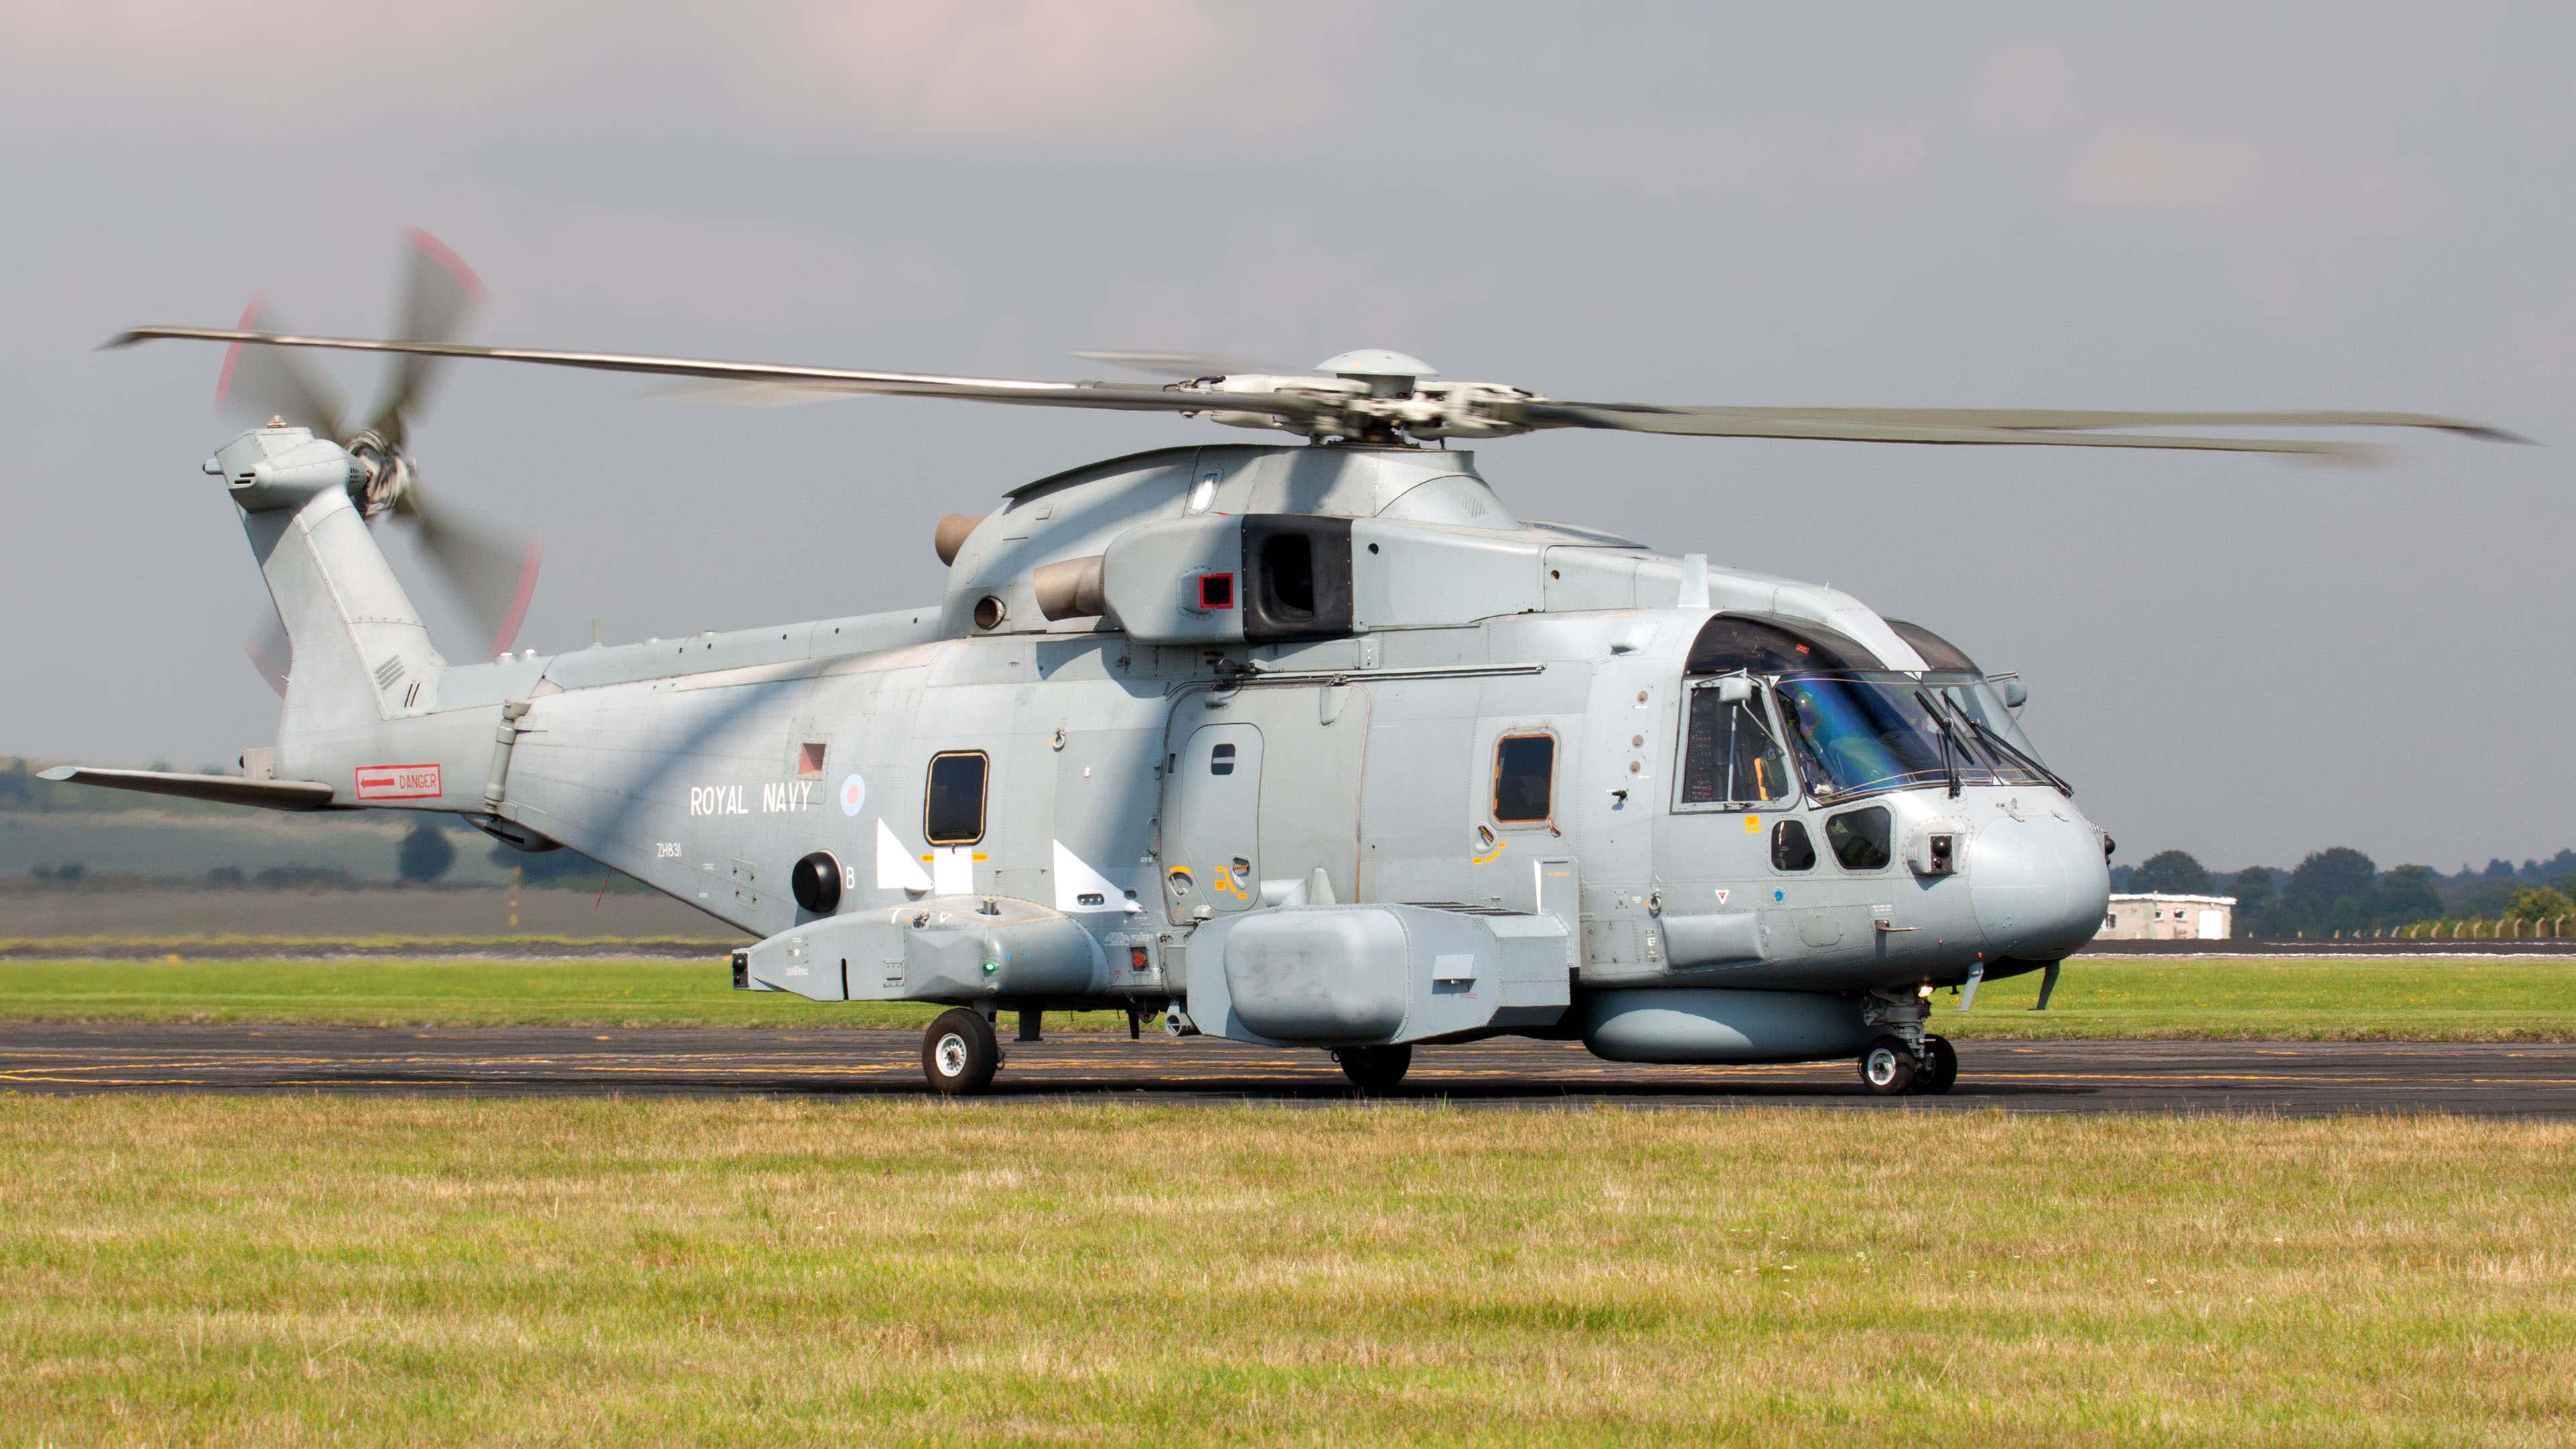 This Is The Early Warning Radar Helicopter The Royal Navy Could Have Had